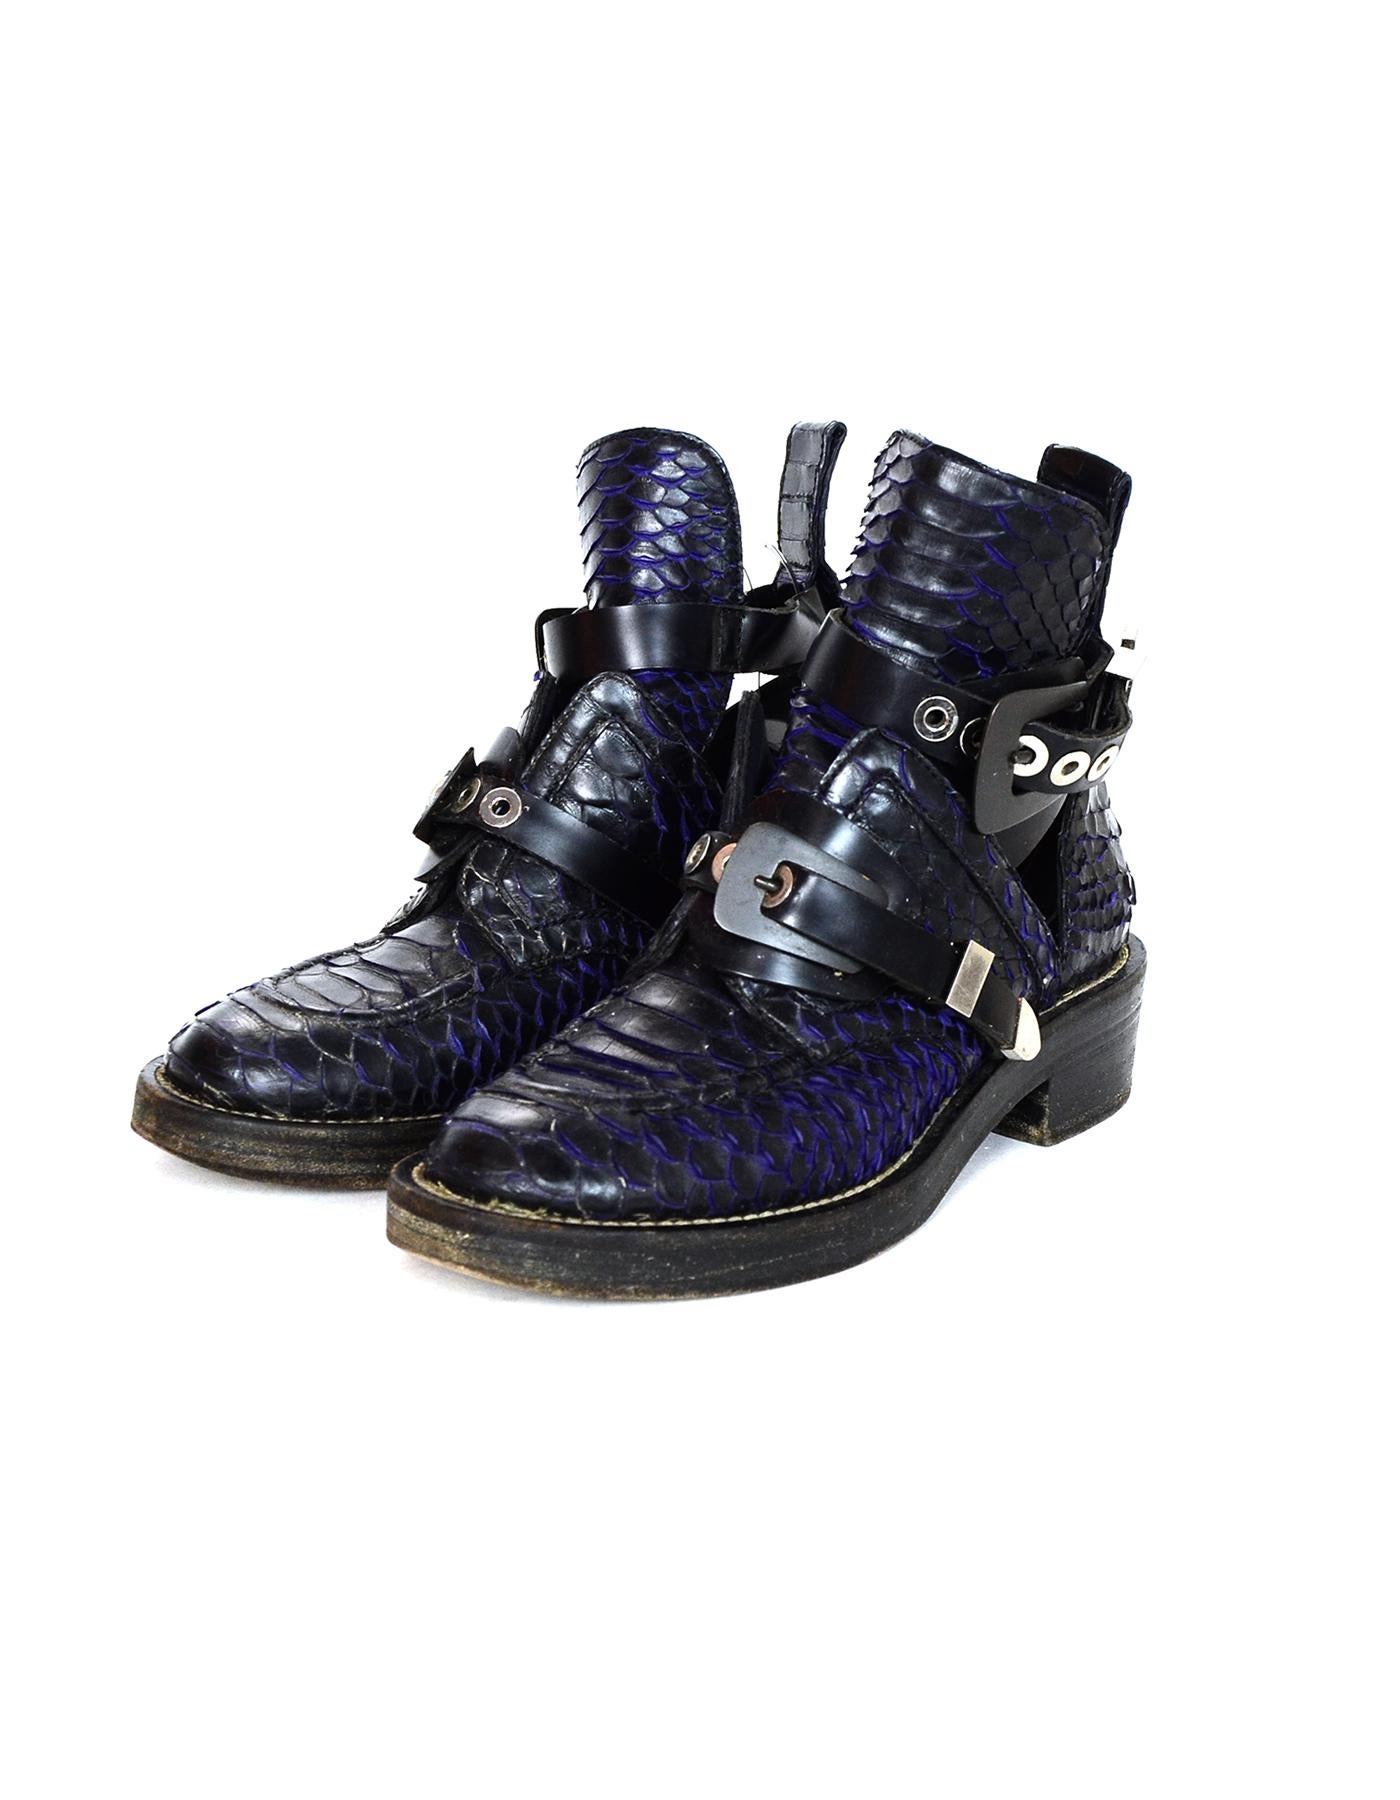 Balenciaga Black/Purple Python Buckle Strap Short Ankle Boots Sz 39

Made In: Italy
Color: Black/purple
Hardware: Silvertone
Materials: Python, leather, and metal
Closure/Opening: One front and one side buckle
Overall Condition: Very good pre-owned